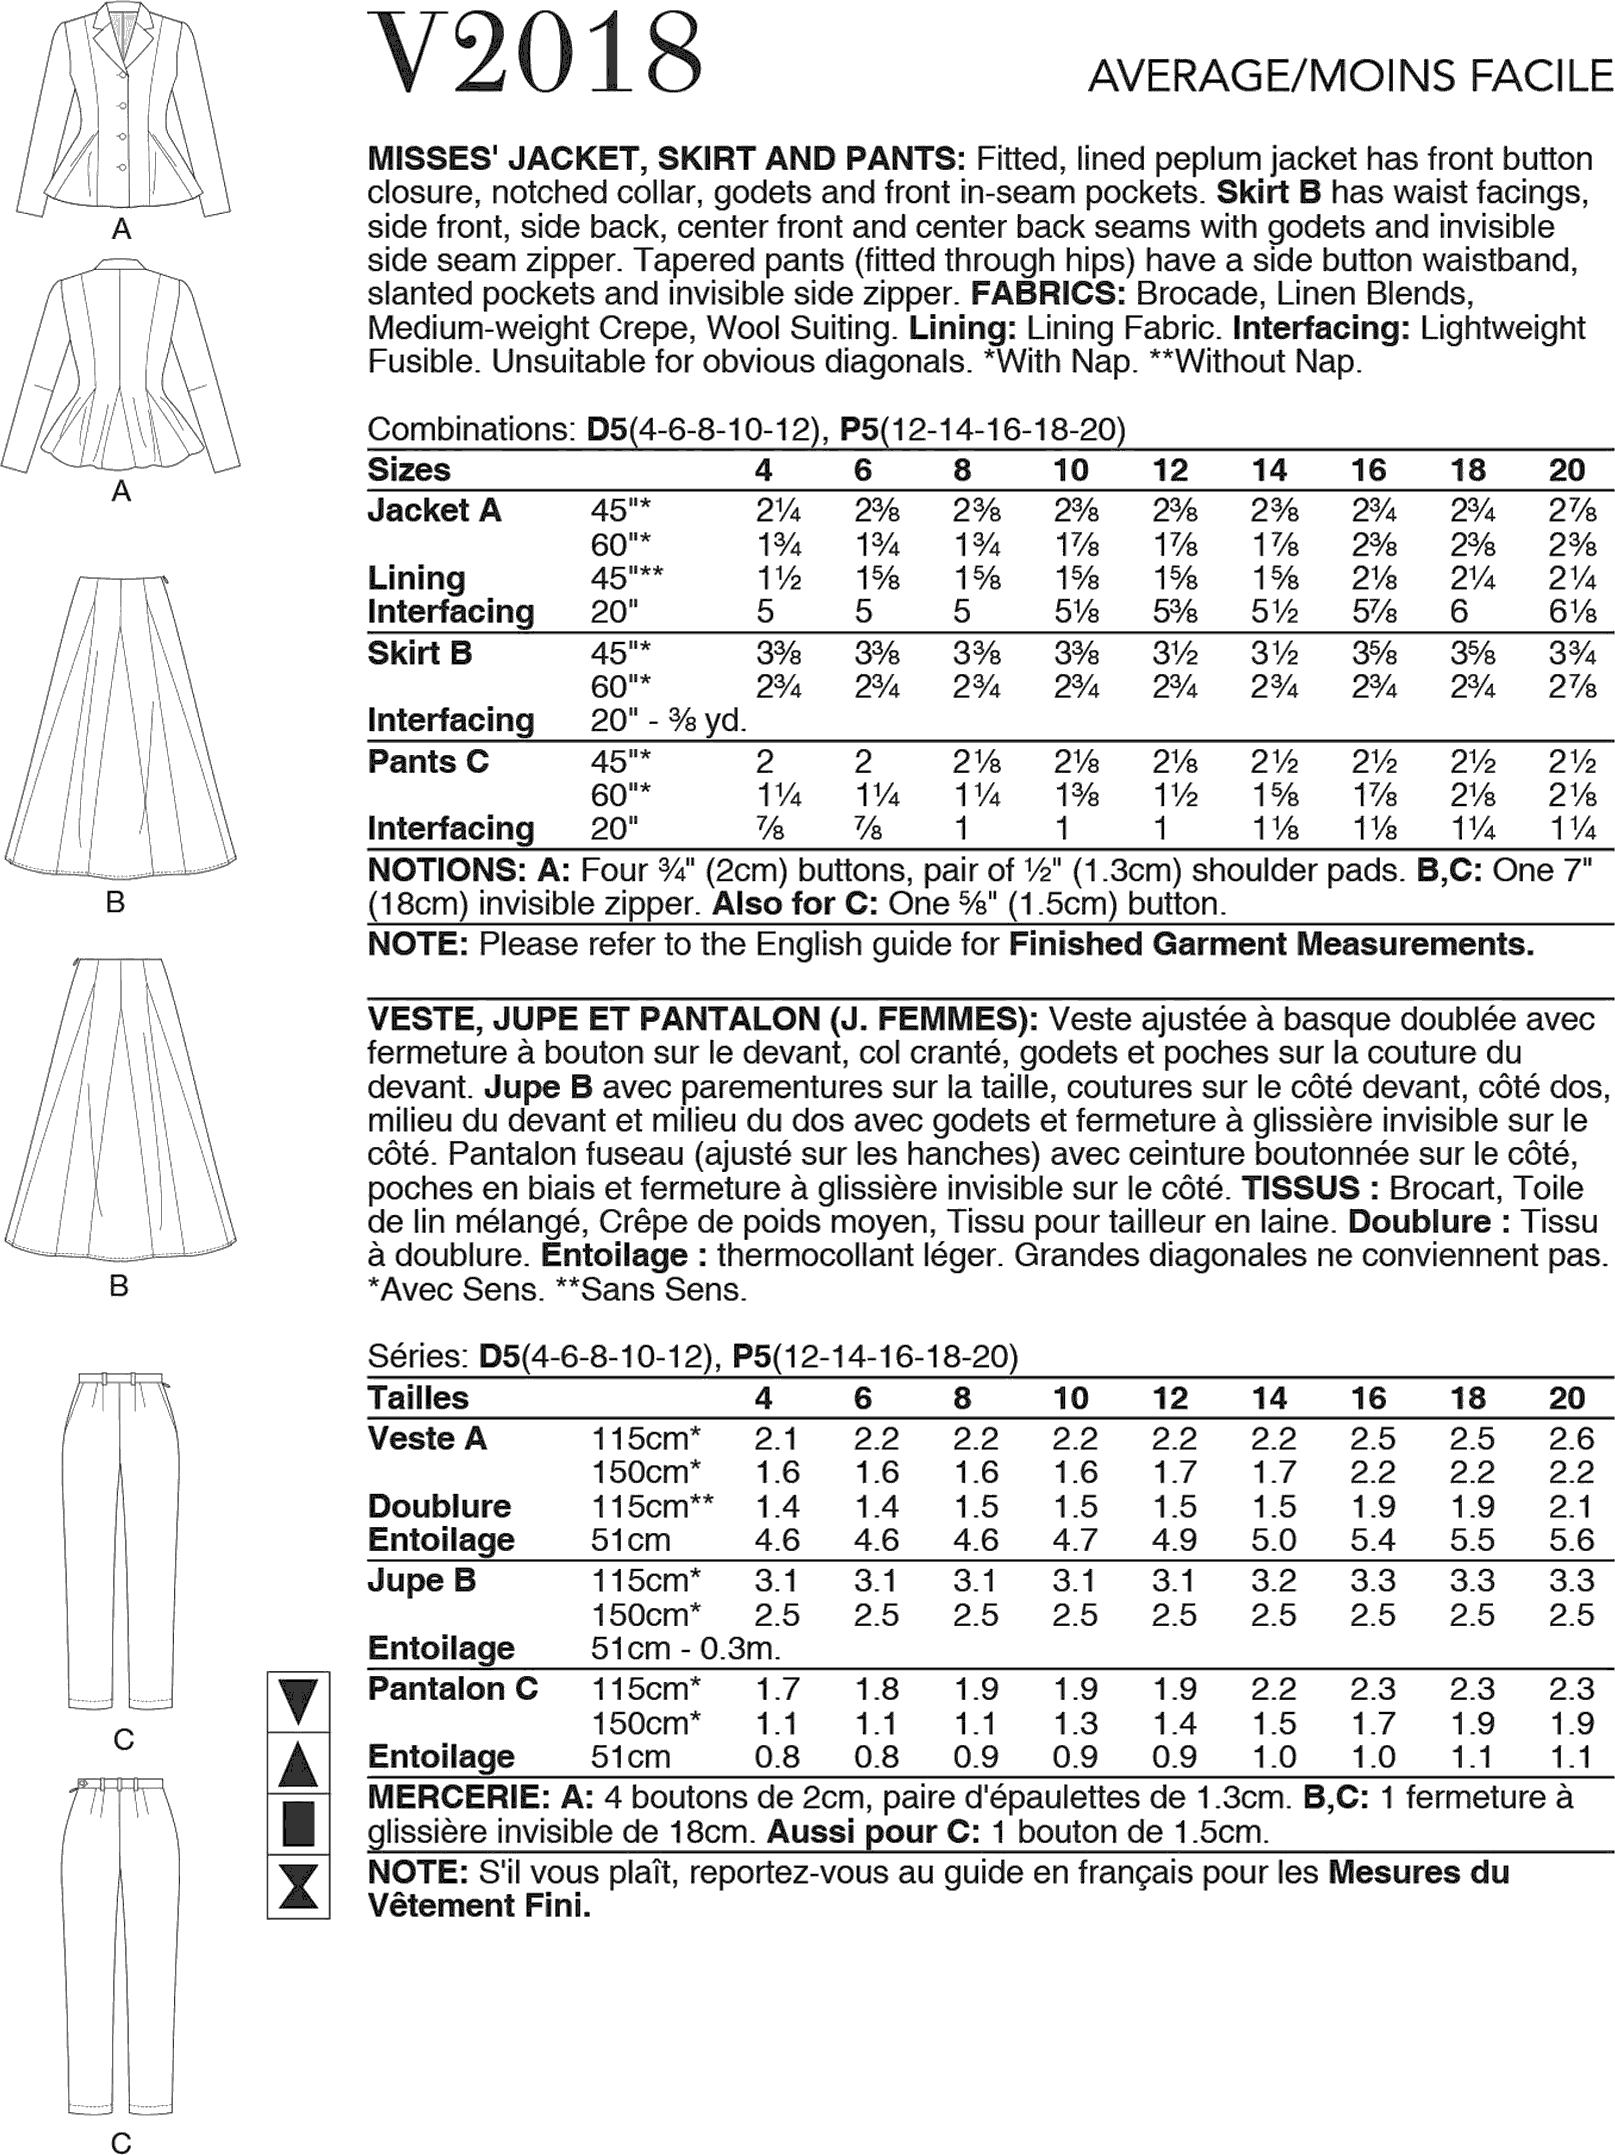 Vogue Pattern V2018 Misses Jacket Skirt and Pants 2018 Fabric Quantity Requirements From Patternsandplains.com